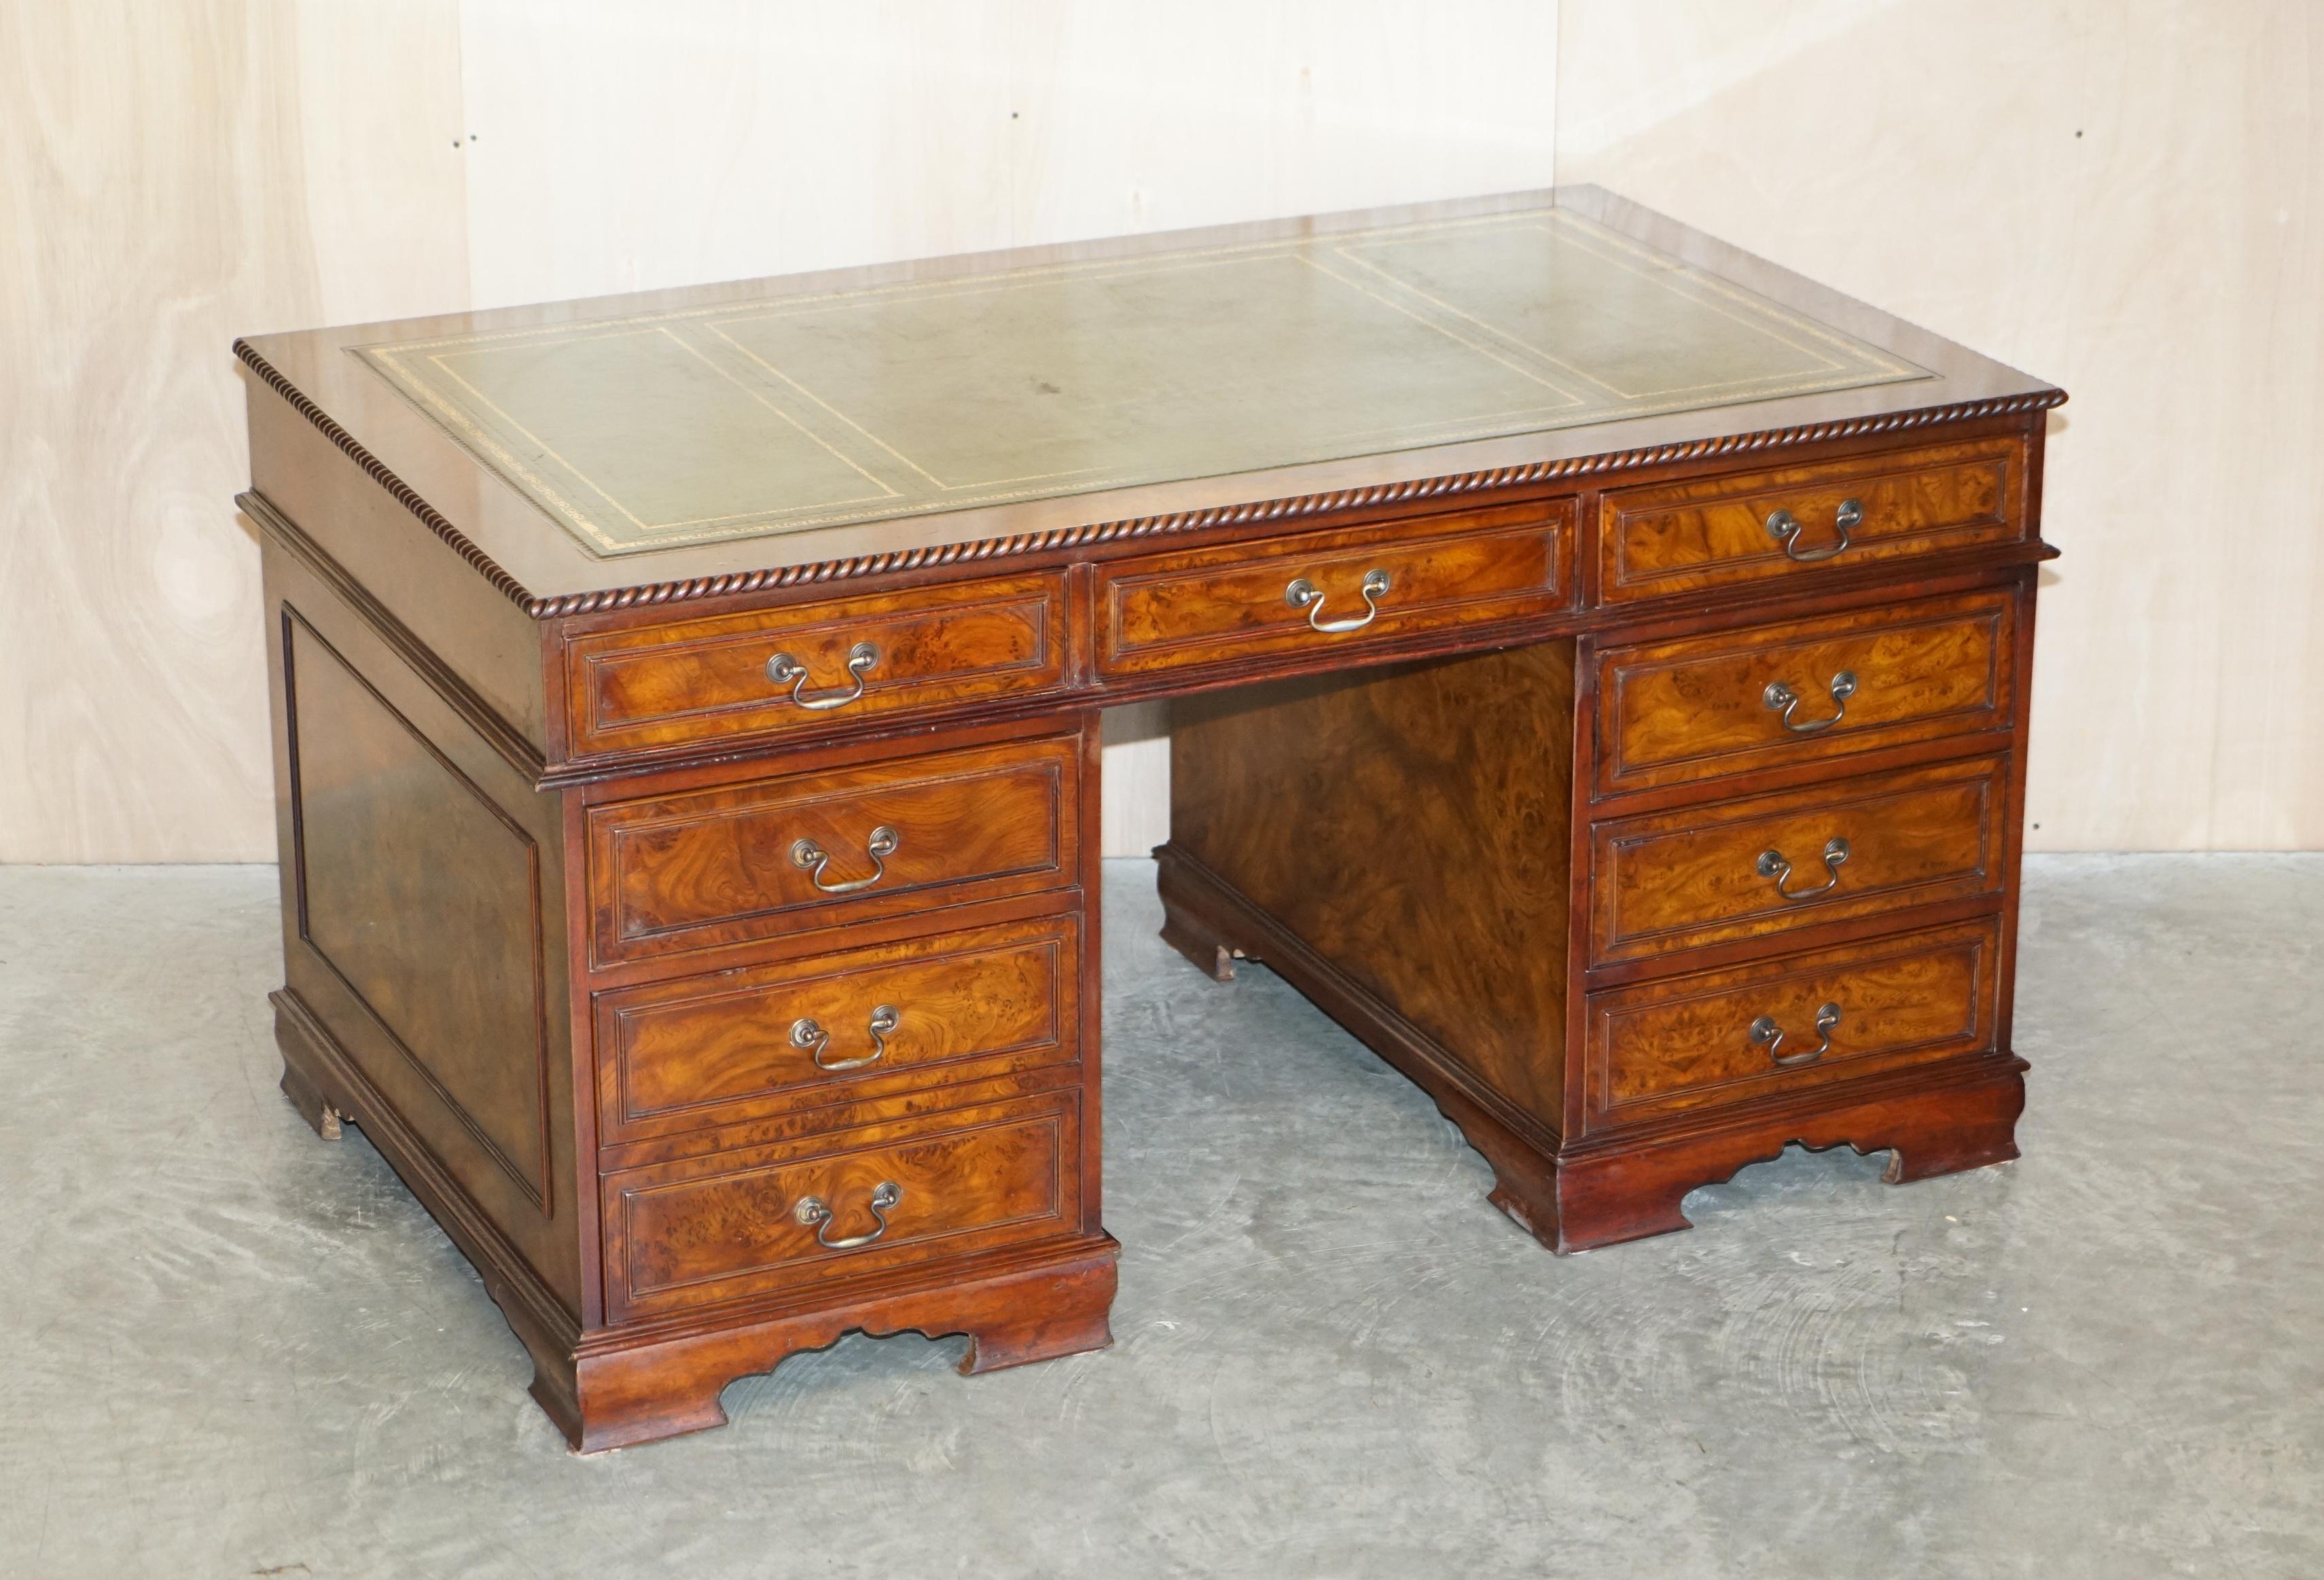 We are delighted to offer this lovely, very well made Burr Elm twin pedestal partner desk with gold leaf embossed green leather writing surface which is part of a suite

As mentioned this is part of a suite, I have in total the large partner desk,